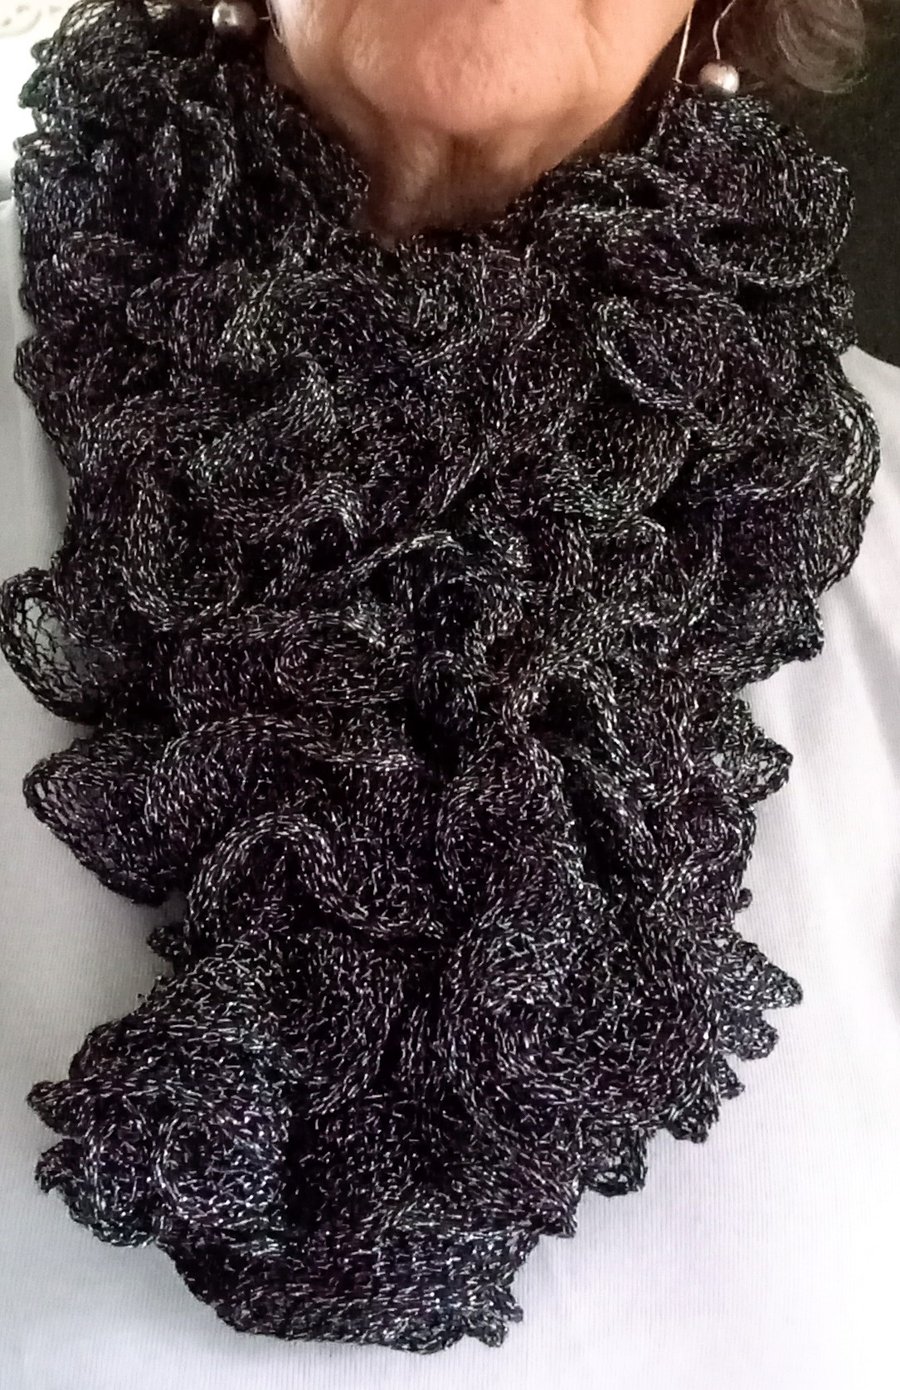 Black frilly scarf with glitter